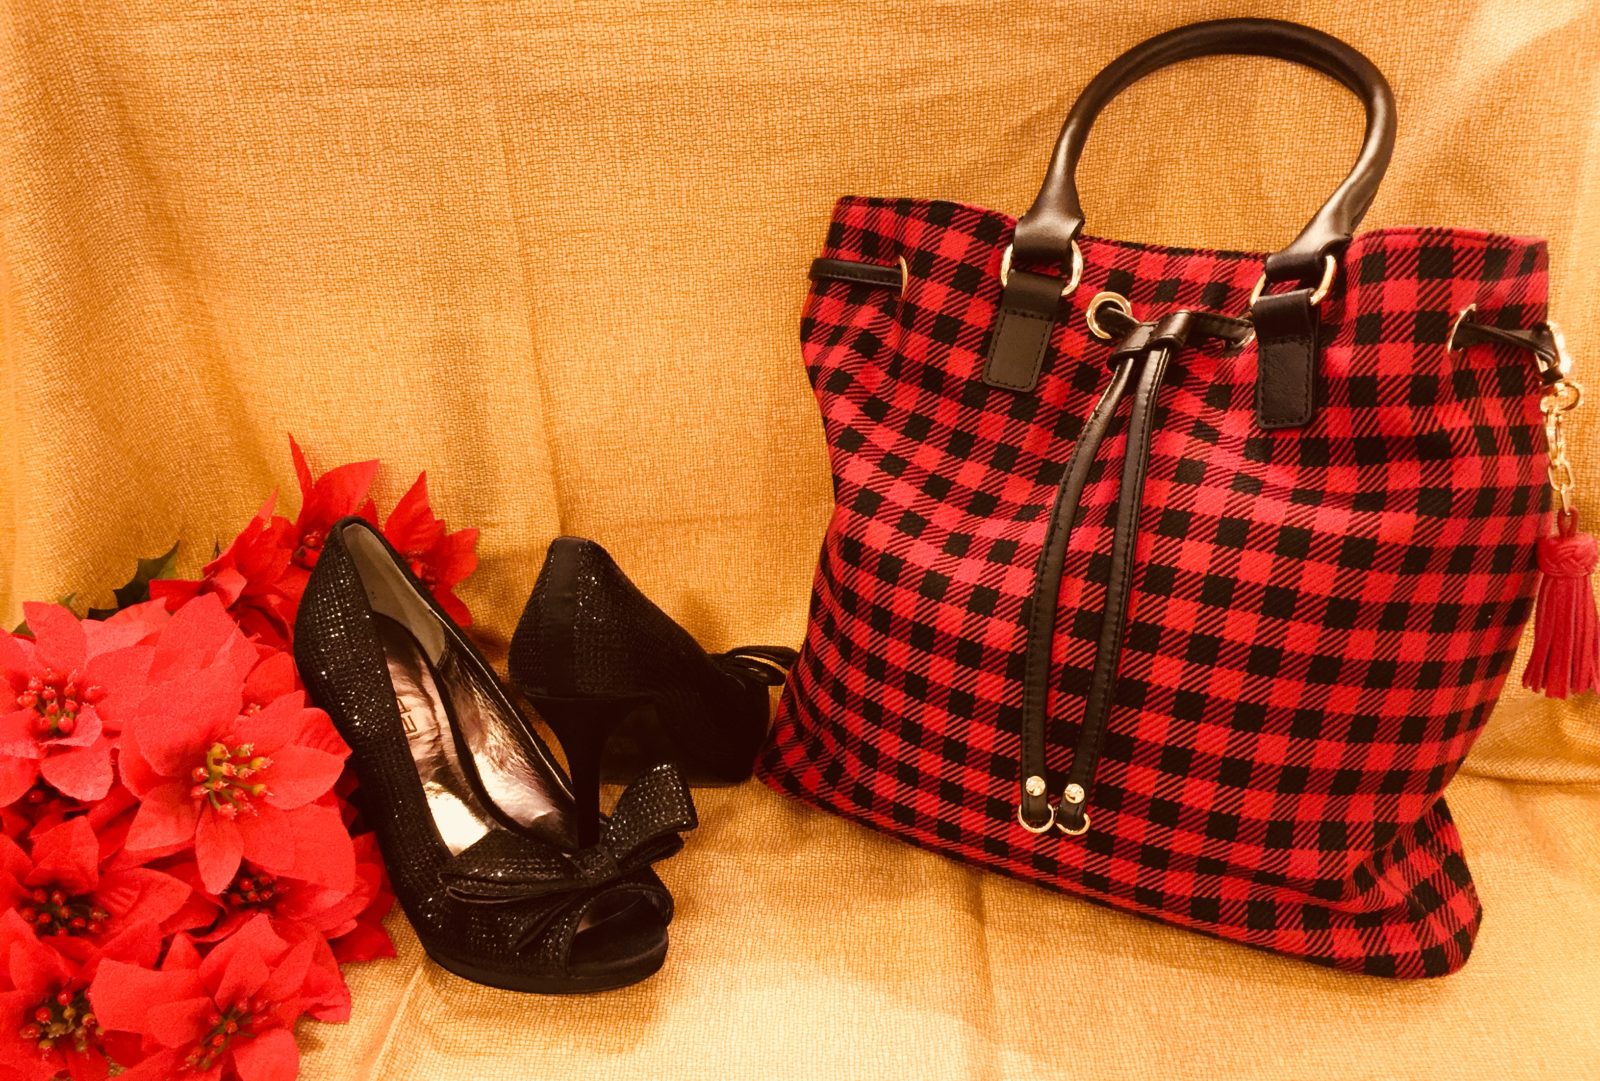 Red & Black Purse • Talbots Red & Black Purse With Gold Accent